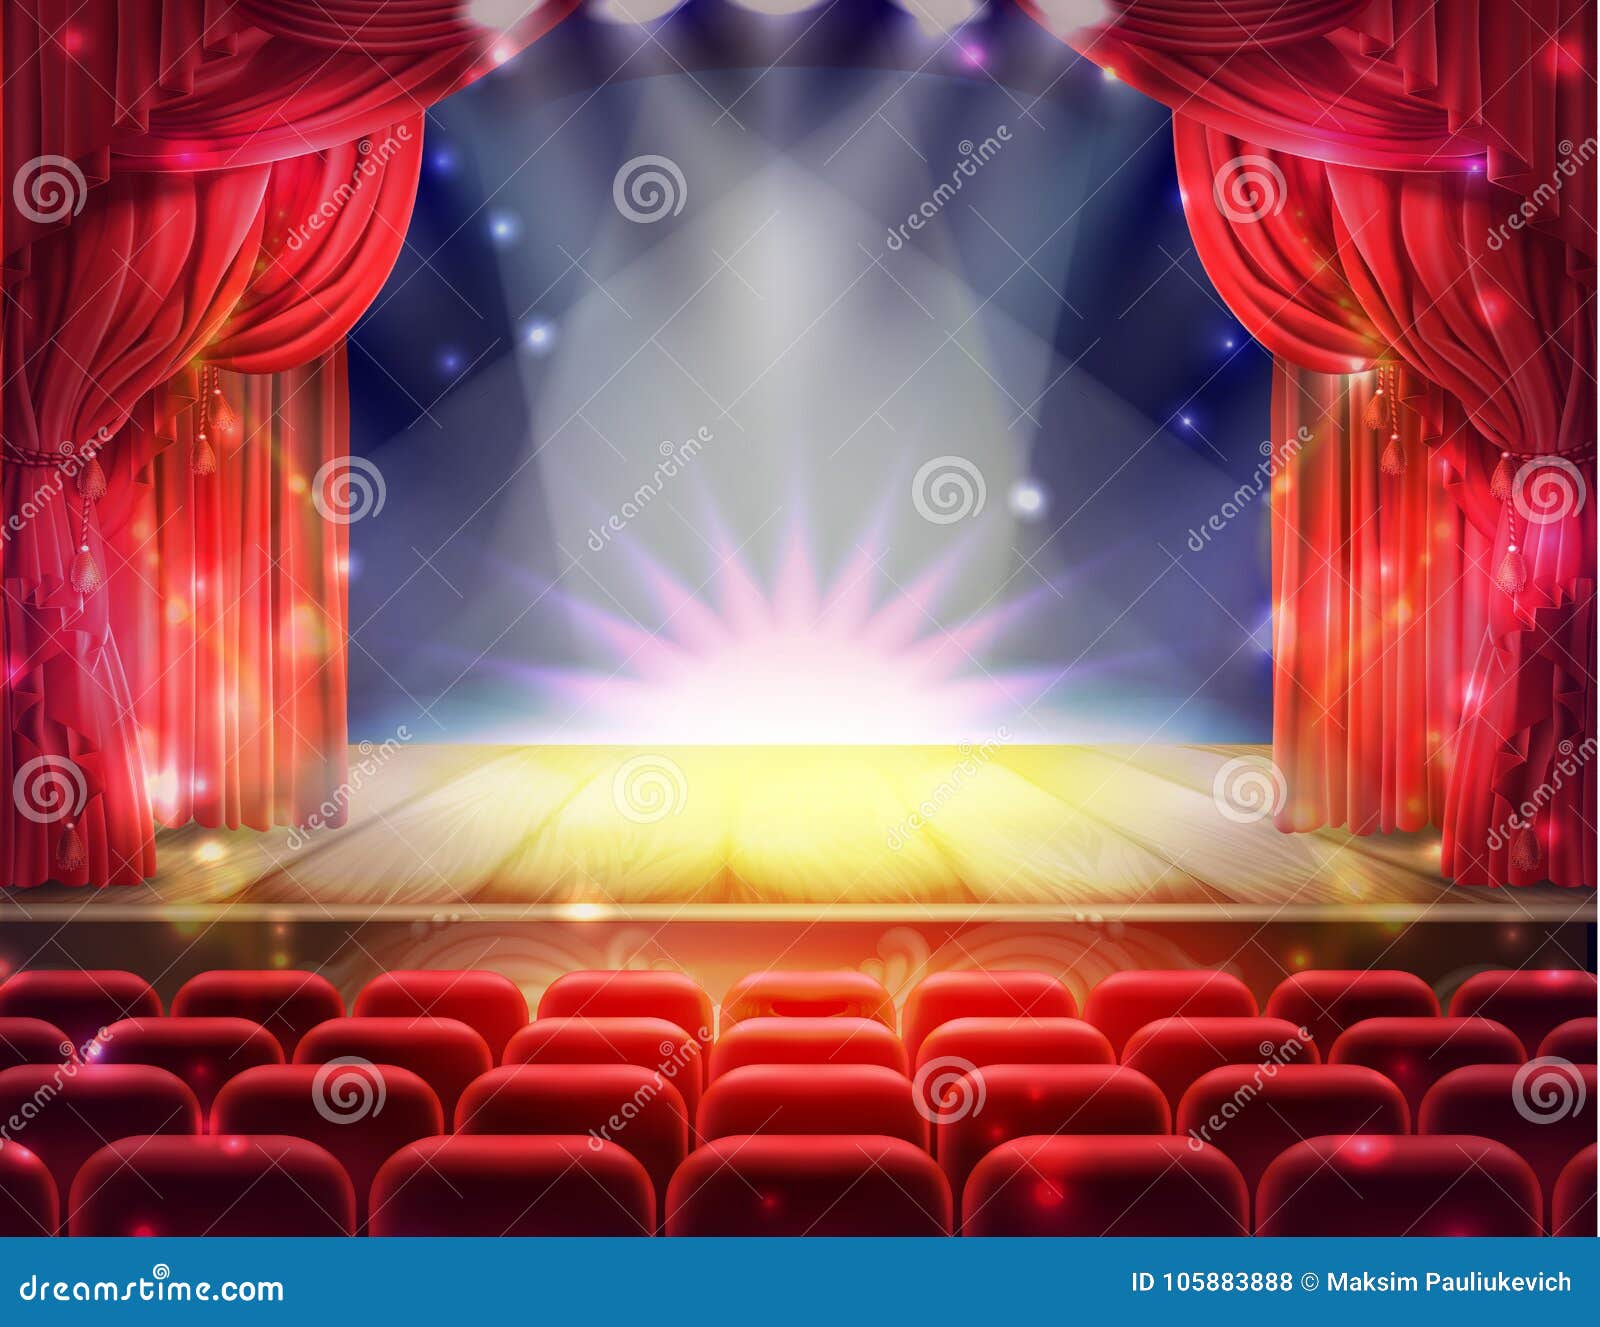 Red Curtain And Empty Theatrical Scene Stock Vector ...